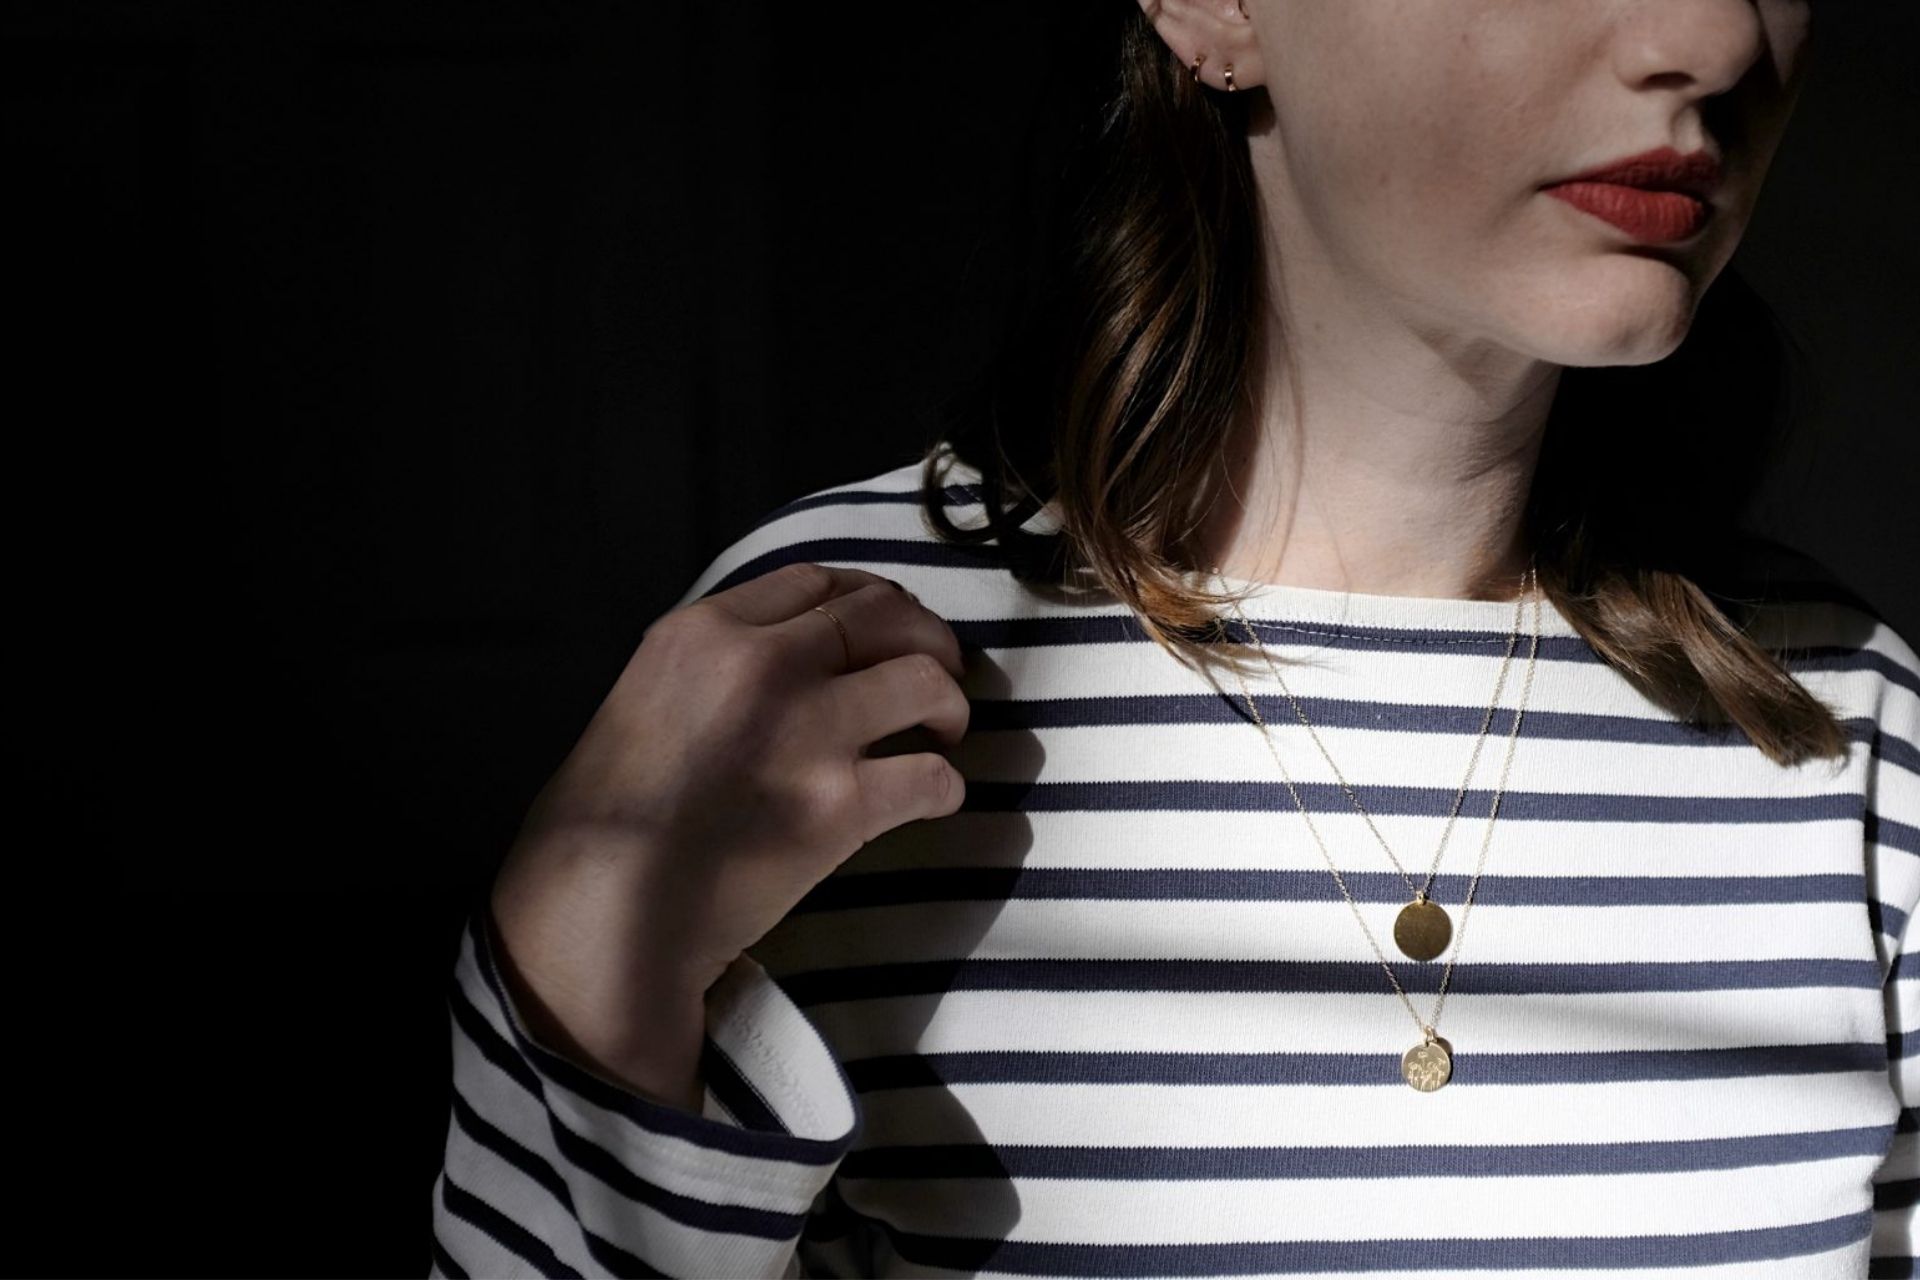 Alyssa is wearing two necklaces, two earrings, and a ring. She is wearing a striped tee and red lipstick, and the image is closely cropped